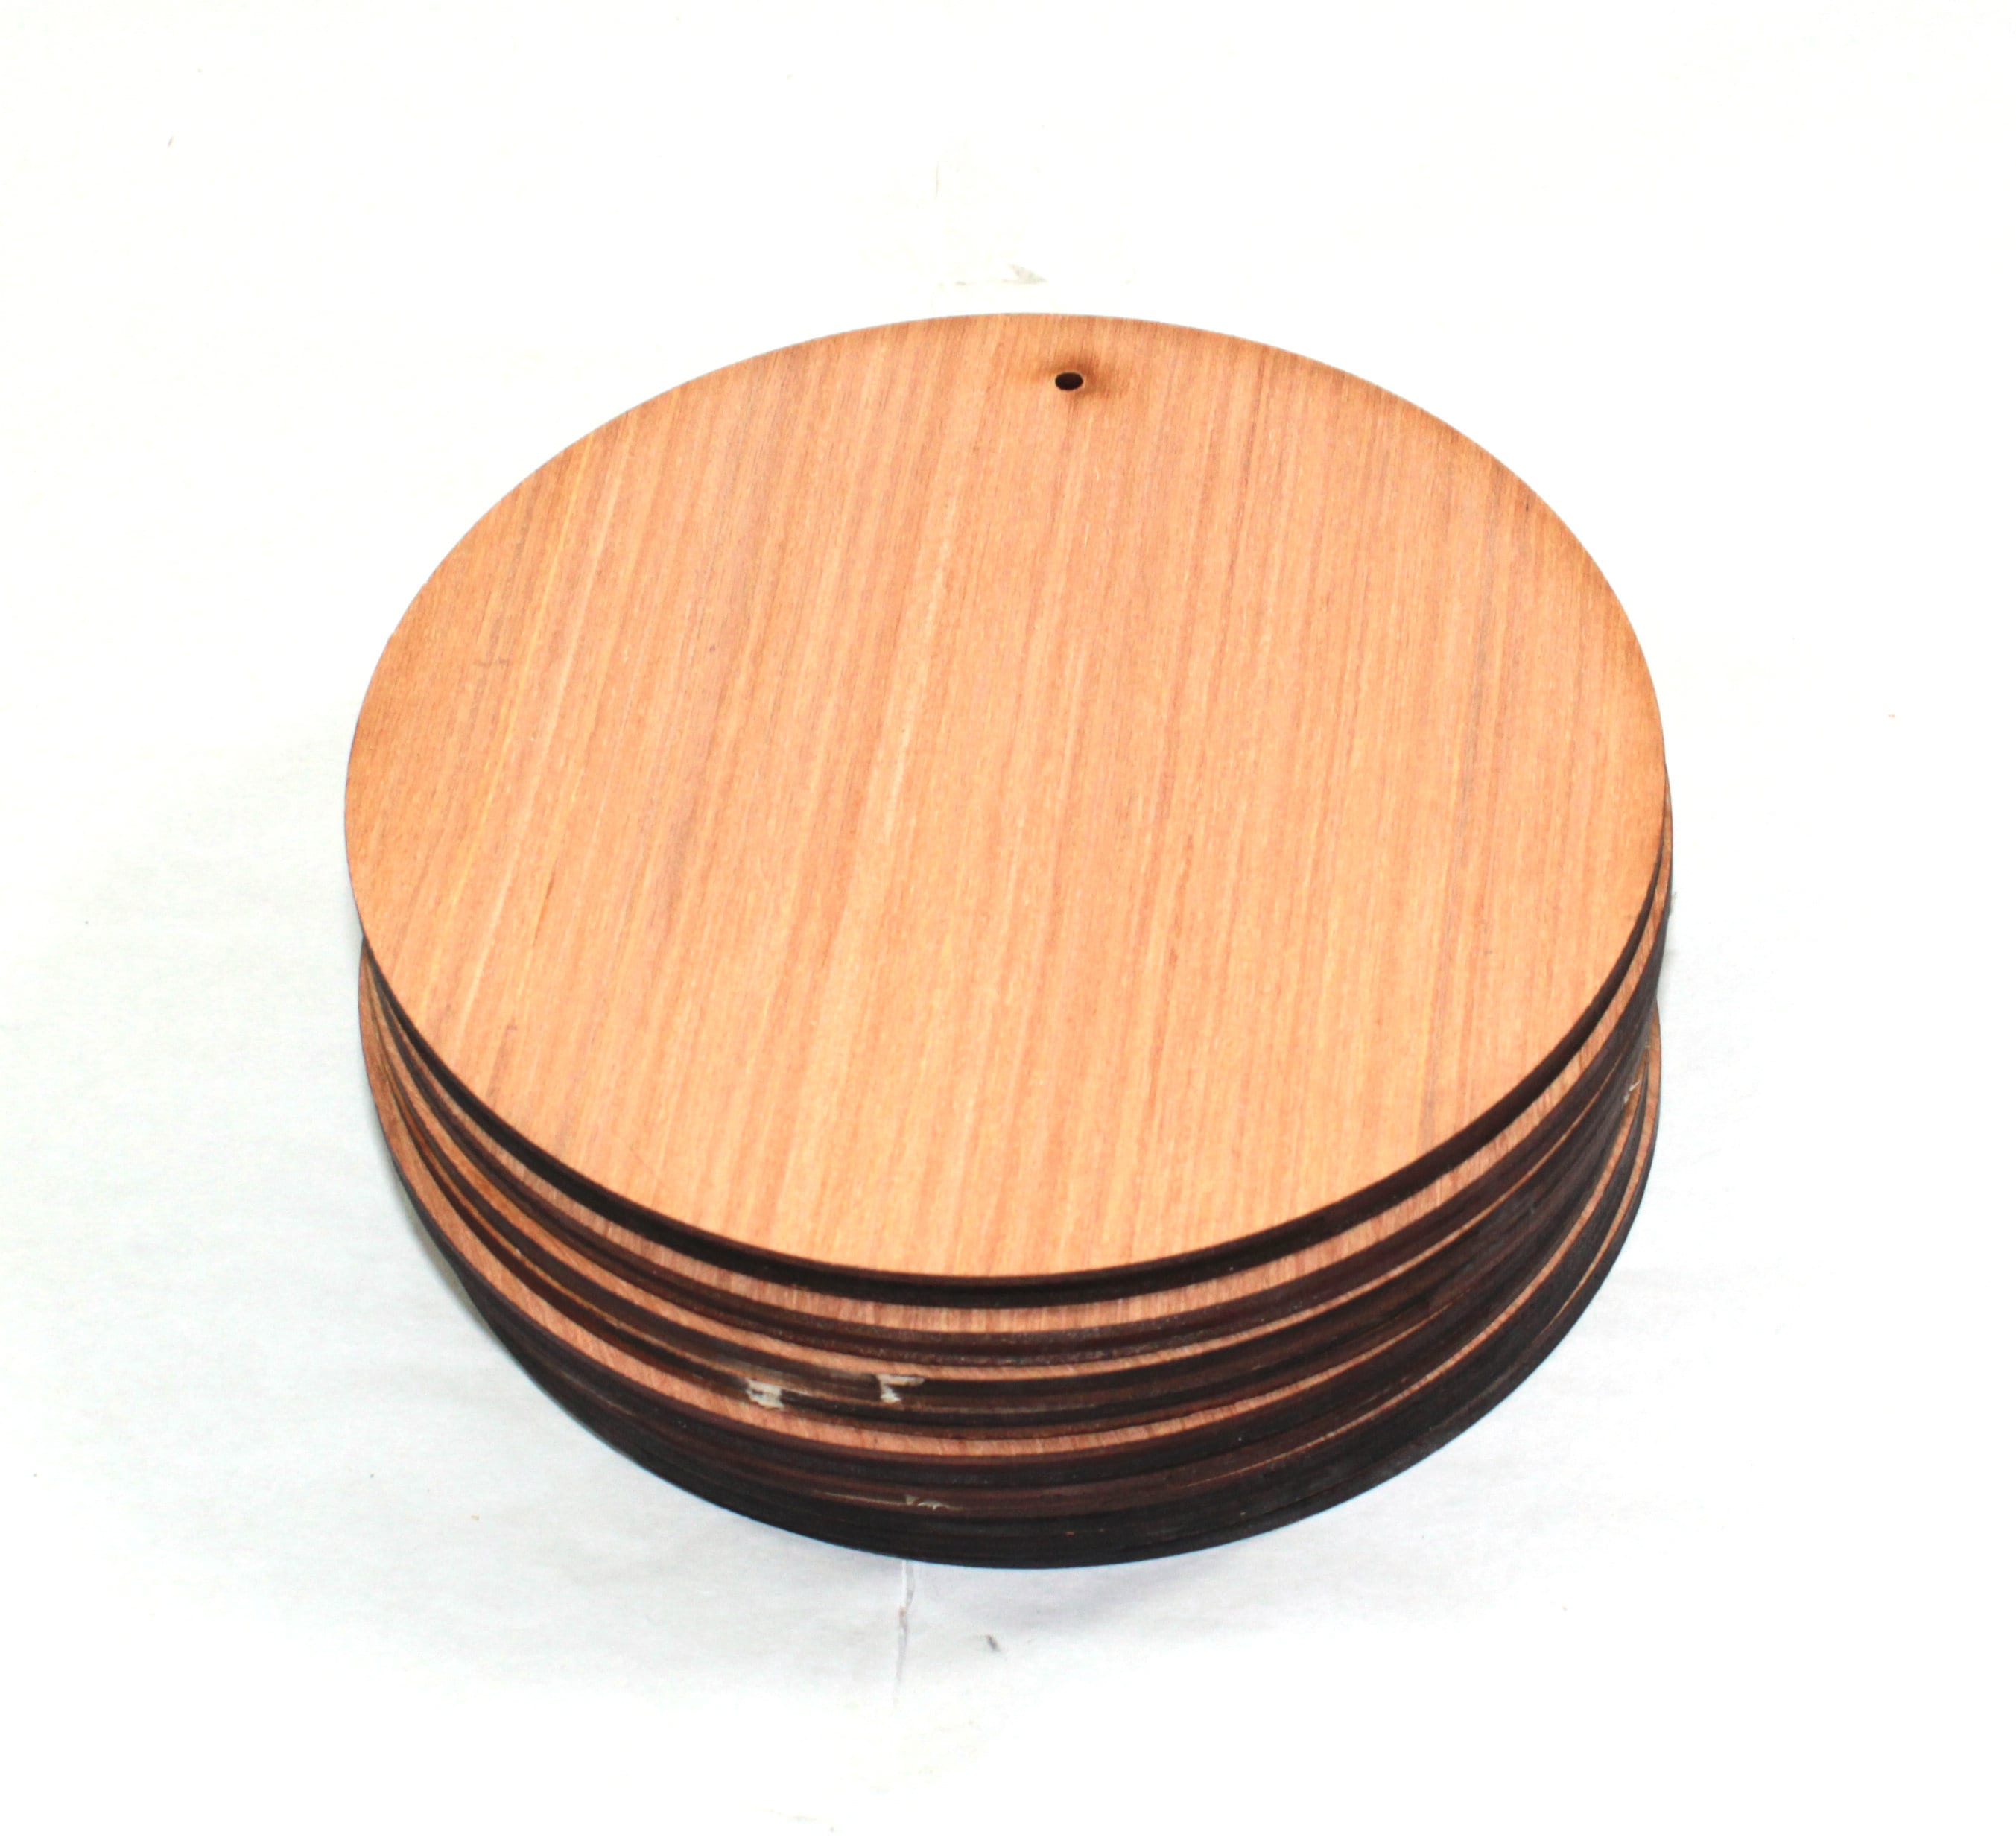 10 Wooden Small Circles 1 Cm, Natural Wood Discs Unfinished Round No Hole,  Blank Craft Circles for Wood Craft and Jewelry Making, Flat Round 